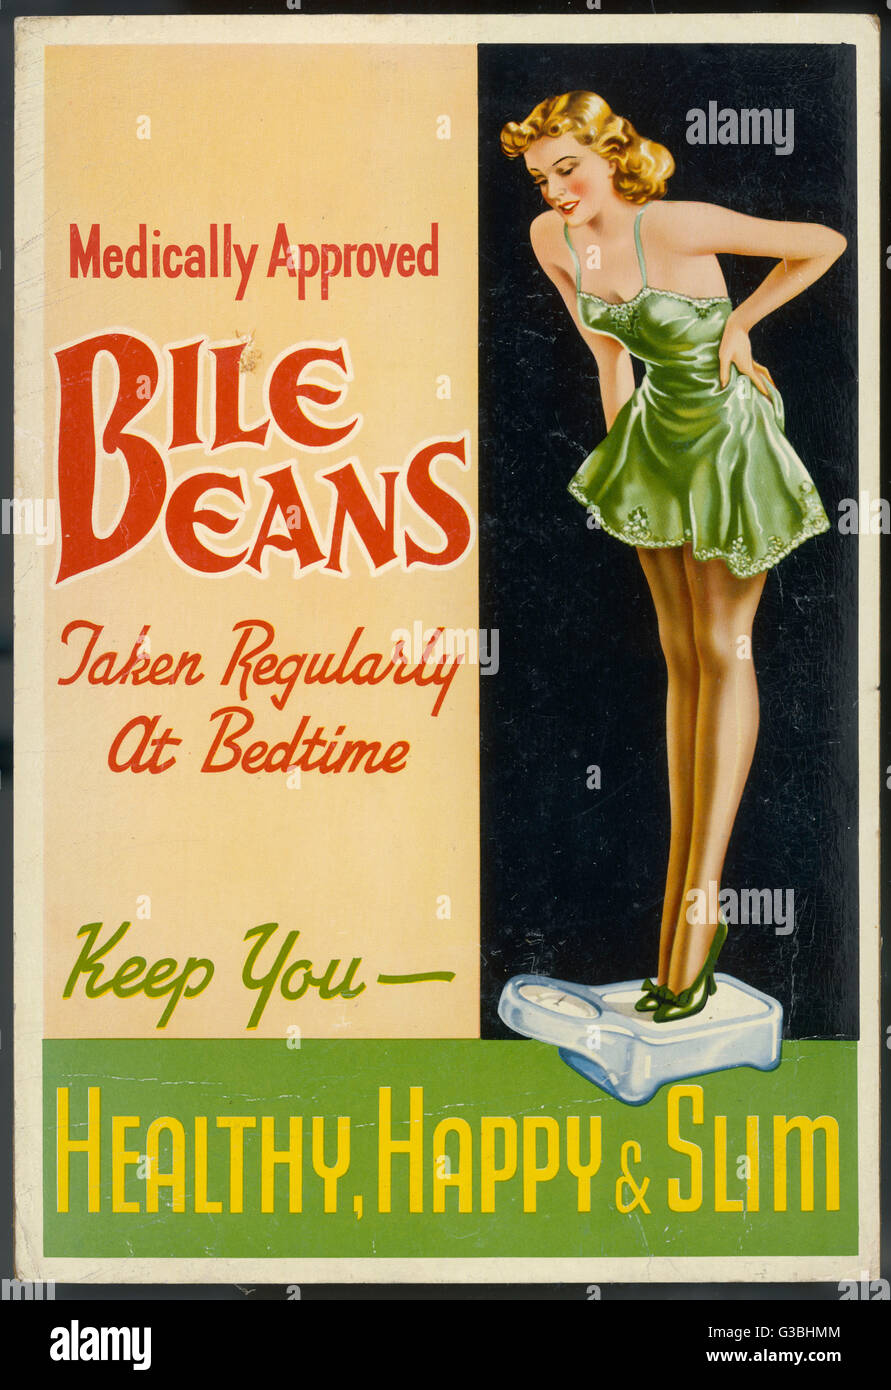 A lady in her slip weighs  herself and is delighted to  find that her bedtime treat of  Bile Beans (yuk !) is keeping  her healthy, happy and slim.      Date: 1940s Stock Photo